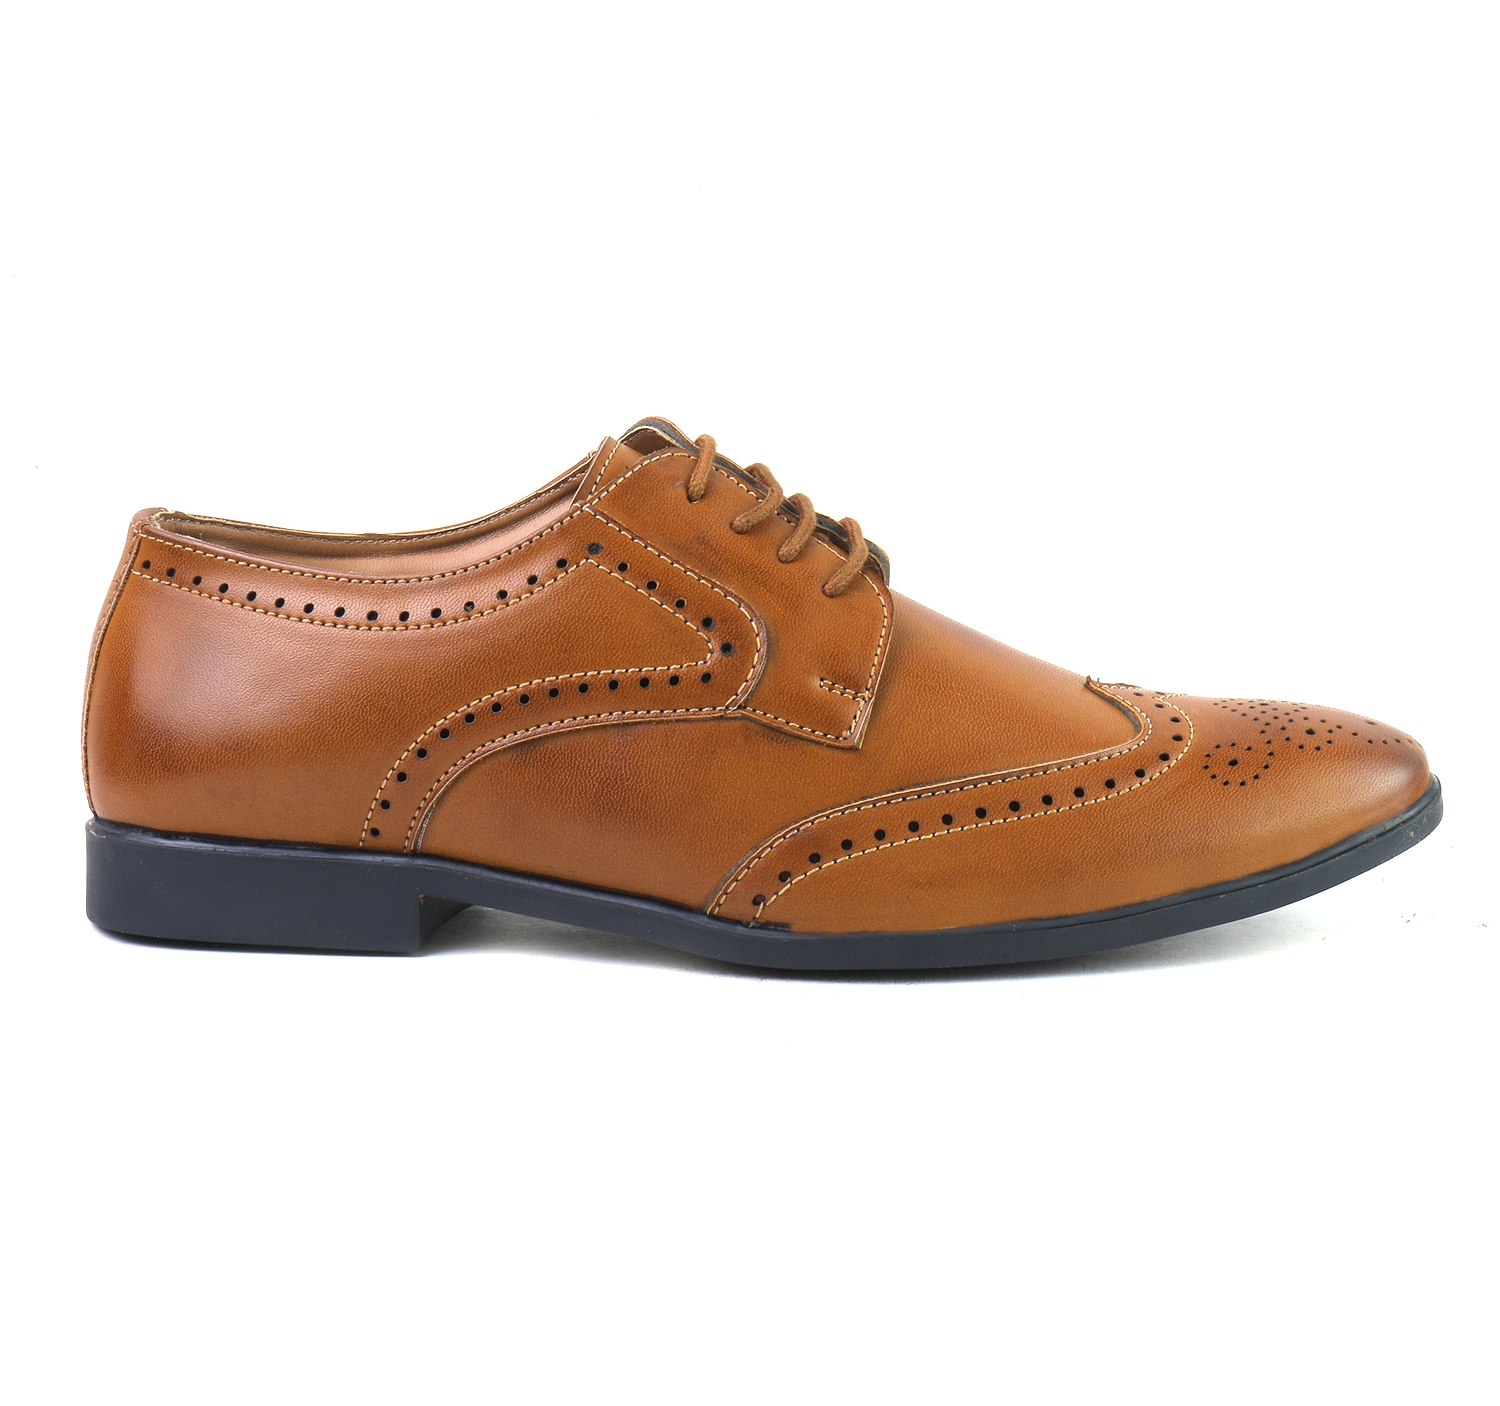 BRATVA | J10 1501 Mens Casual Office Corporate Evening Dress Brogue Shoes for Men in colour Black|Brown|Tan|Cherry 1